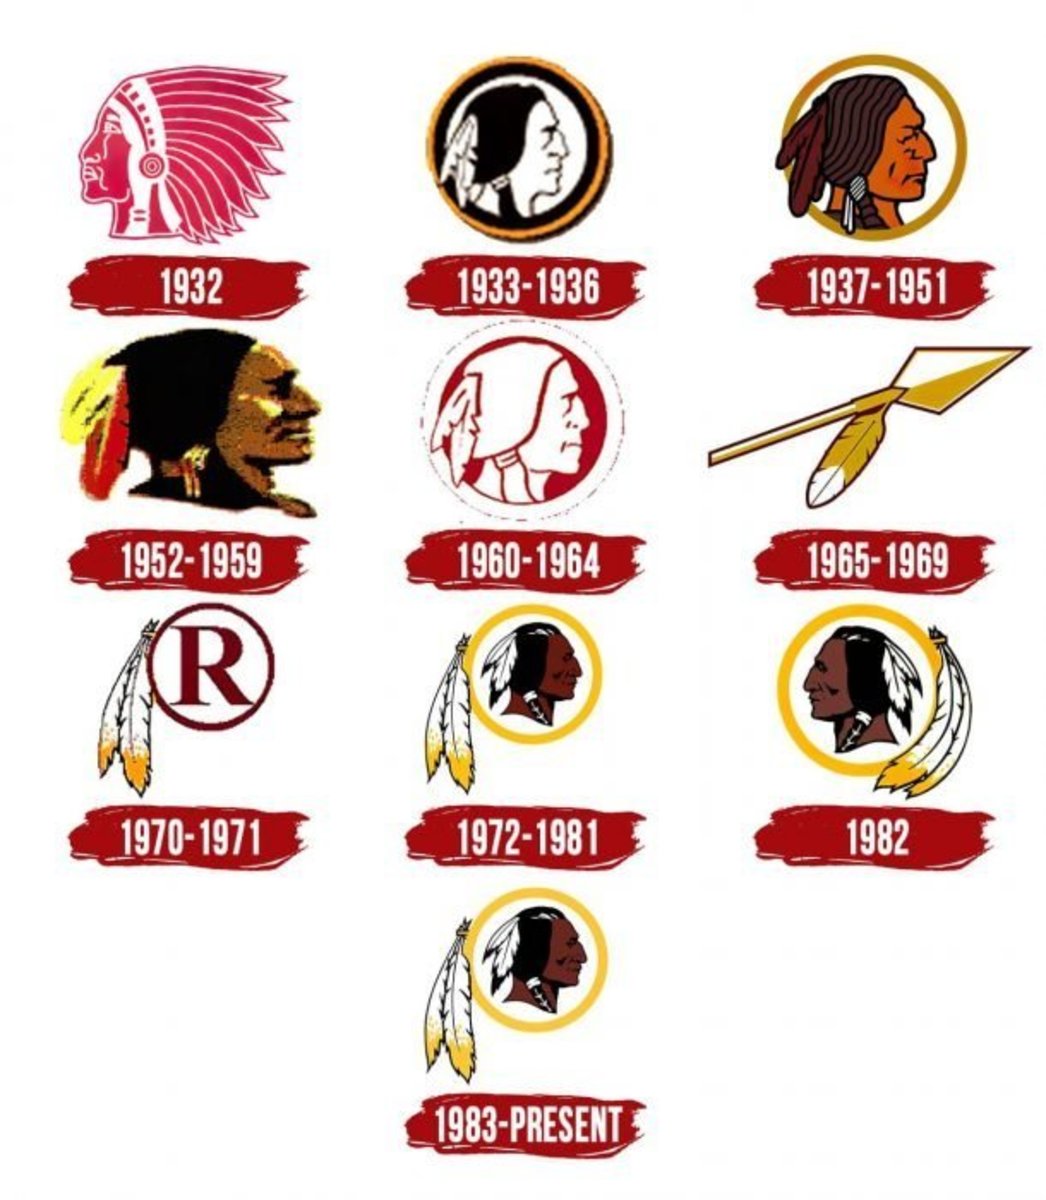 Who Made That Redskins Logo? - The New York Times